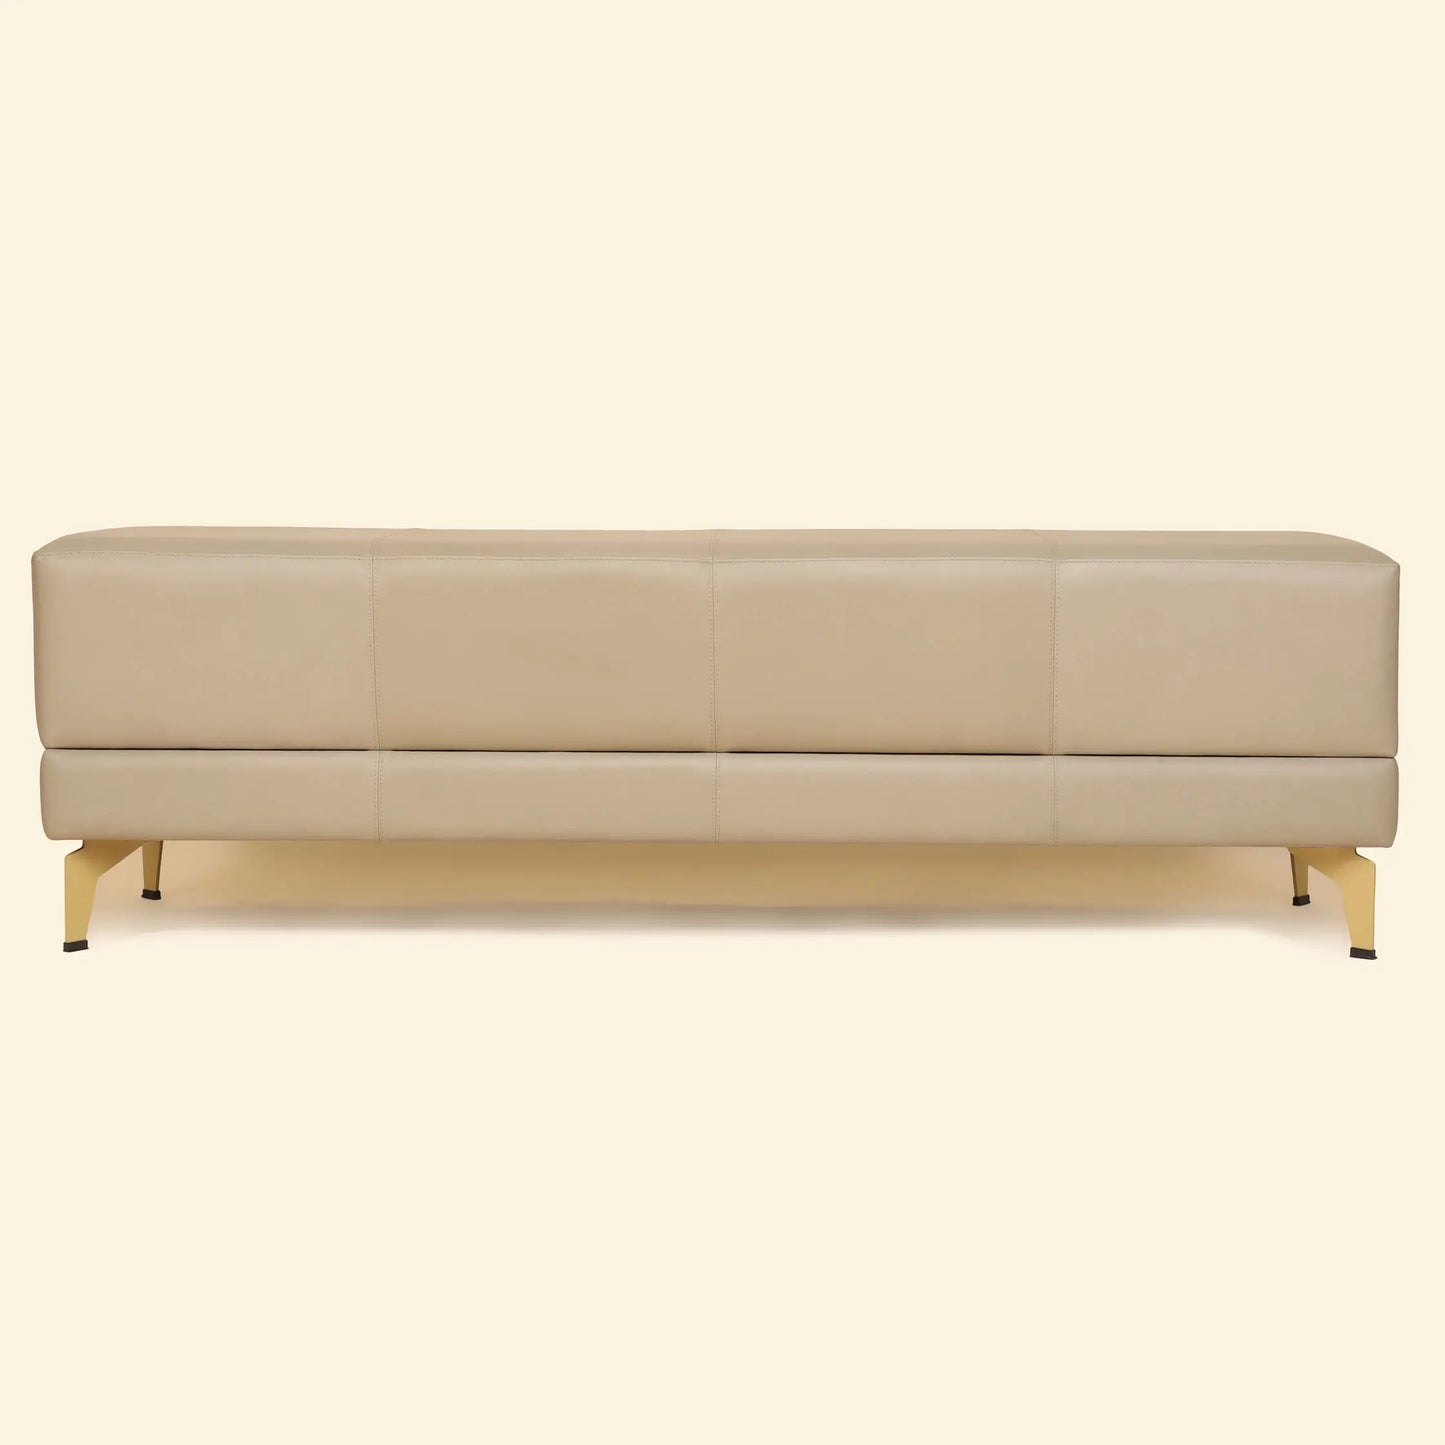 Leather Bench Taupe Colour